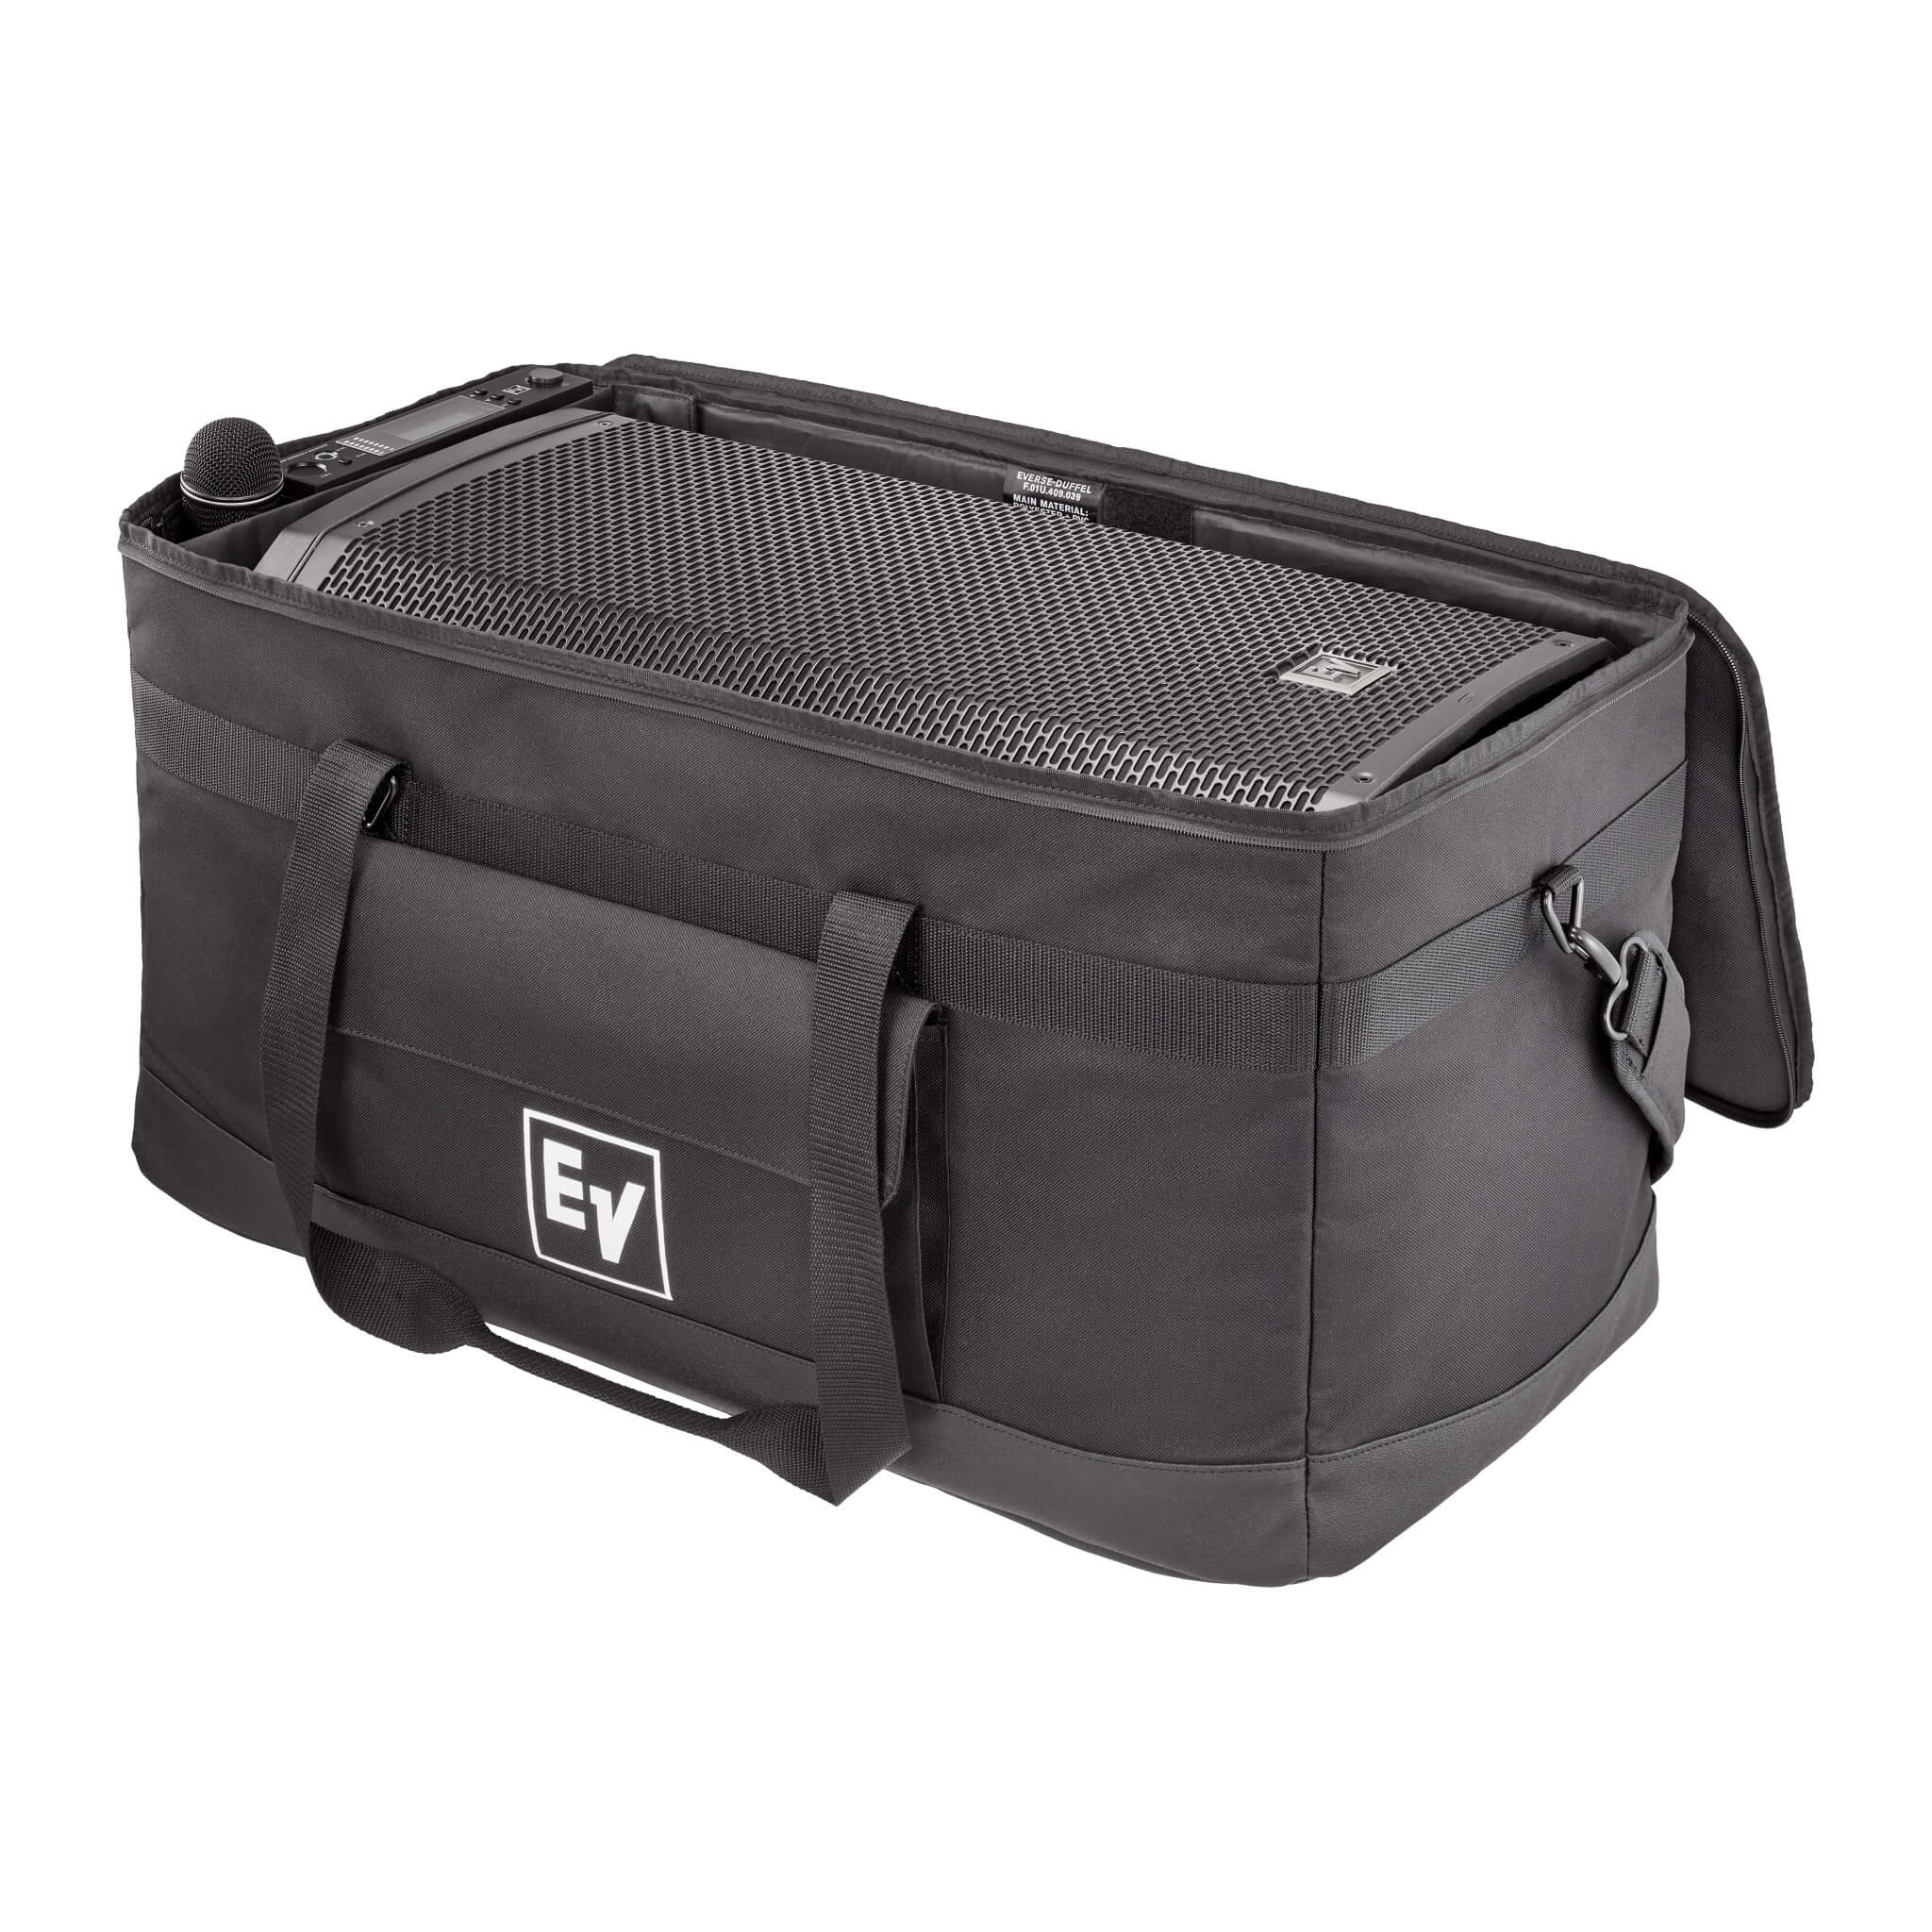 Electro-Voice EVERSE-DUFFEL - Padded Duffel Bag for EVERSE Loudspeaker, shown open with one EVERSE 12